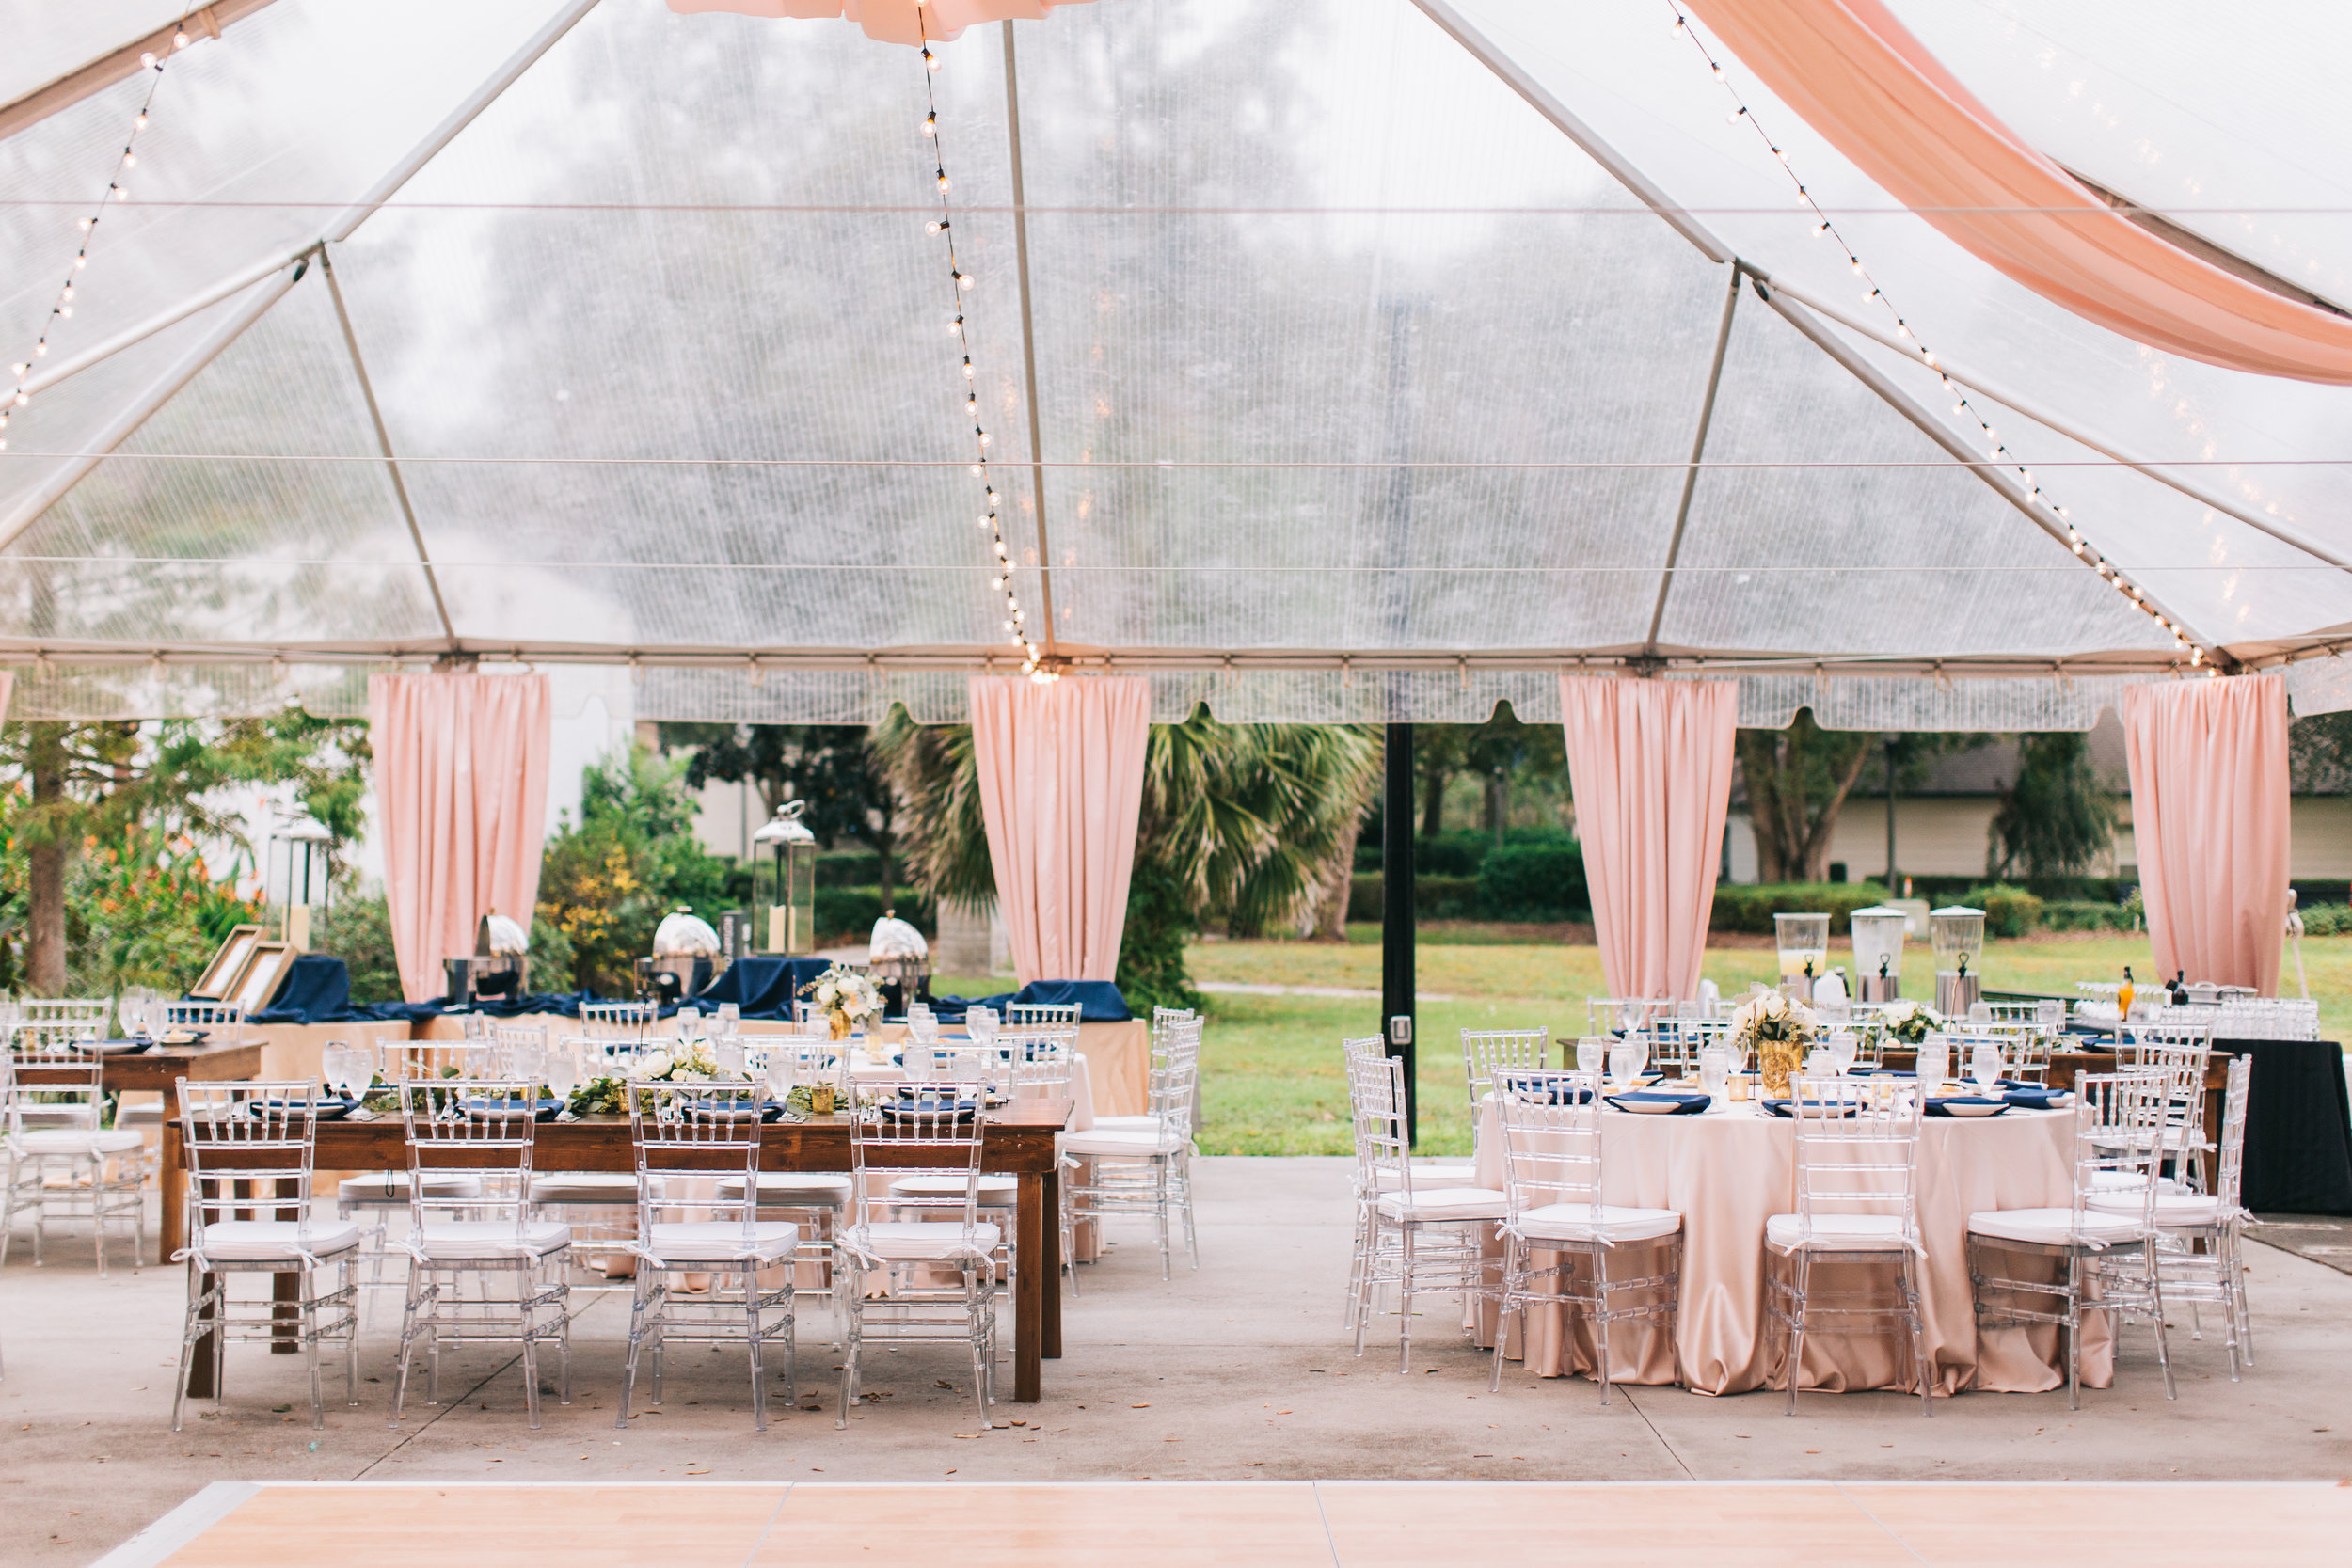  Reception under the clear top tent 